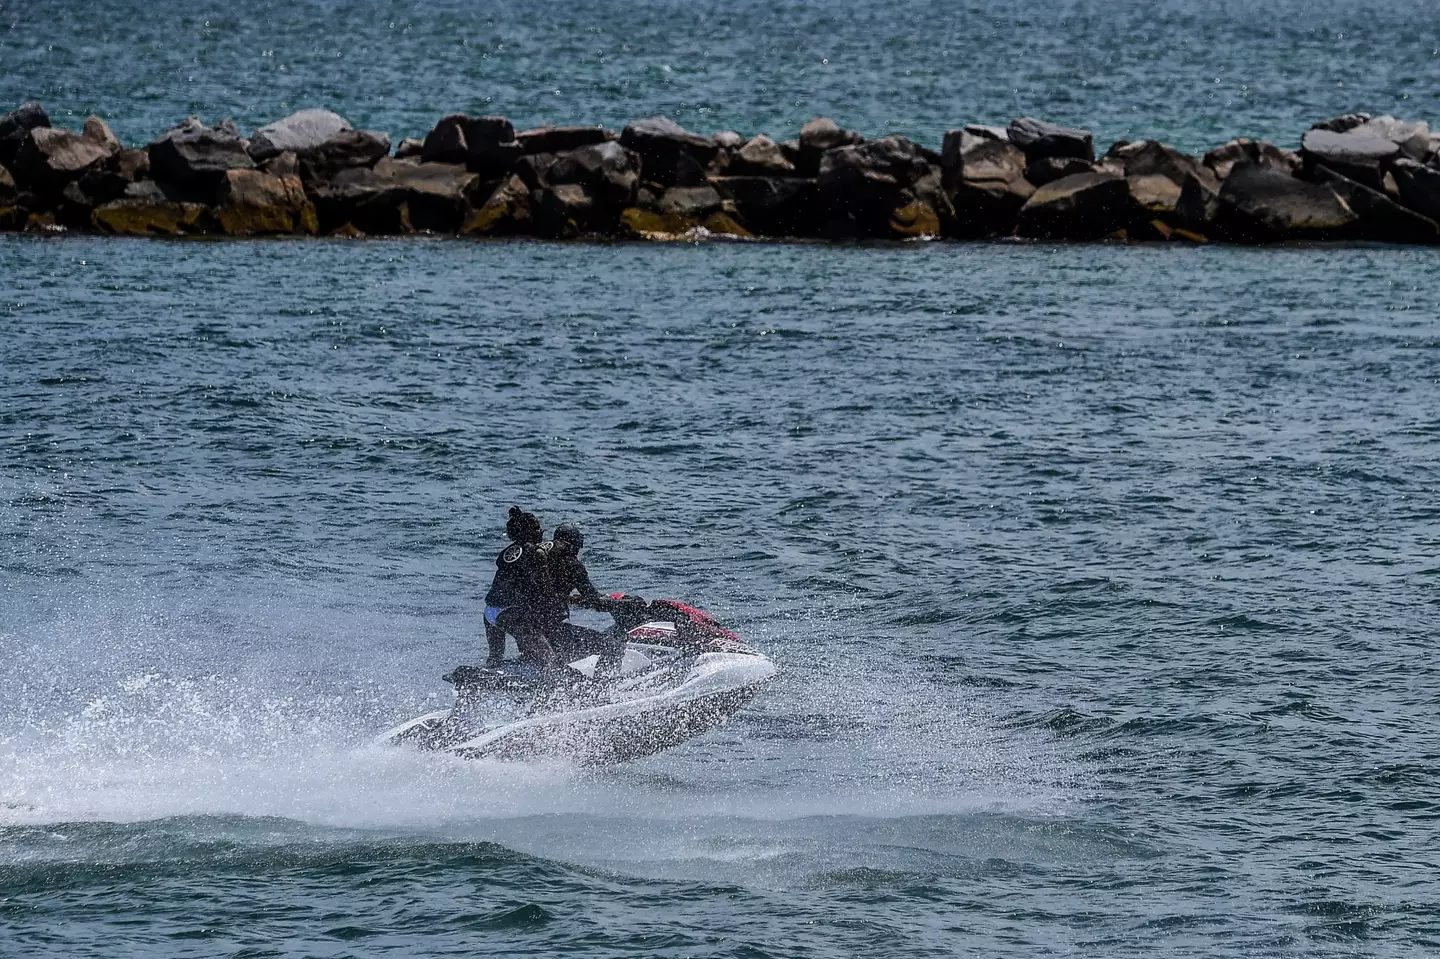 The jet skiers drifted across the border (stock image).